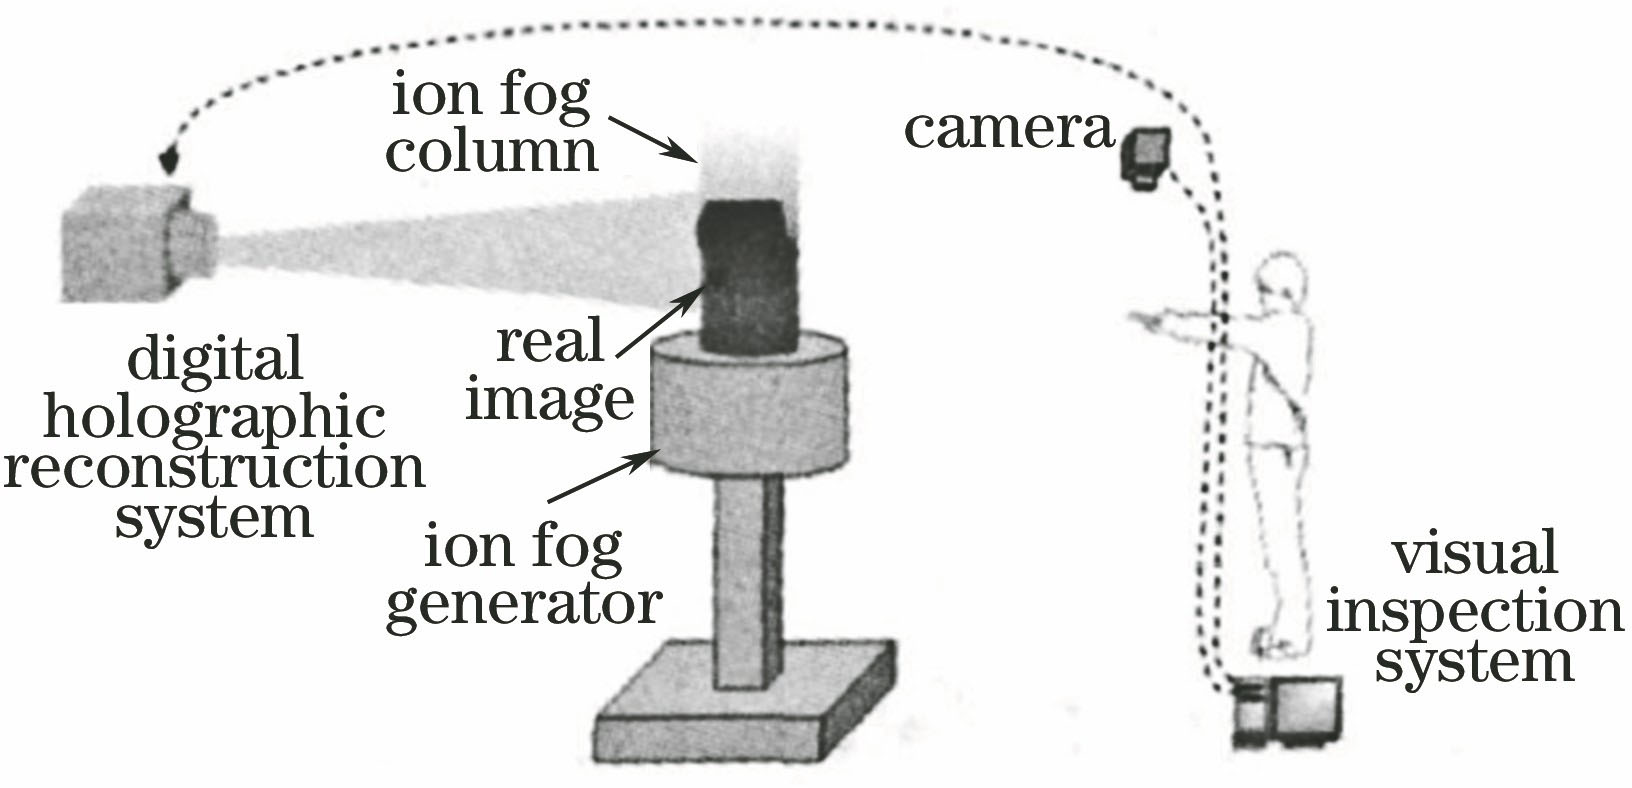 Interactive system of finger and holographic image based on visual detection[31]